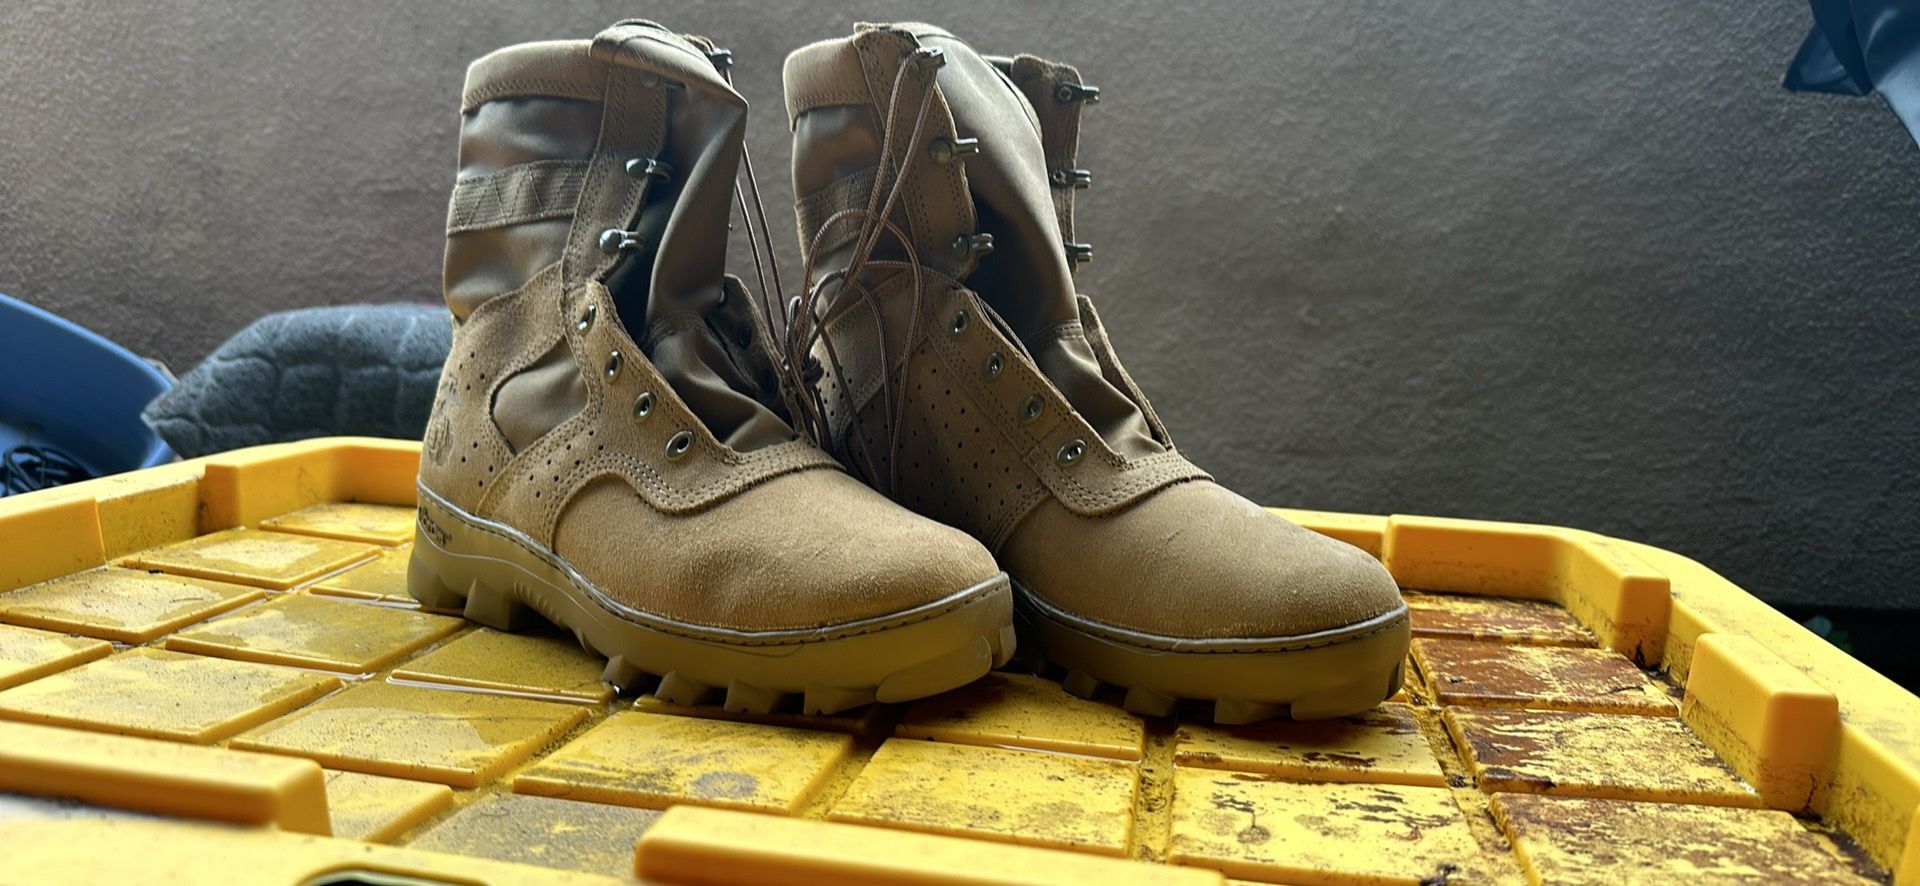 NEW Tactical Military Boots. 